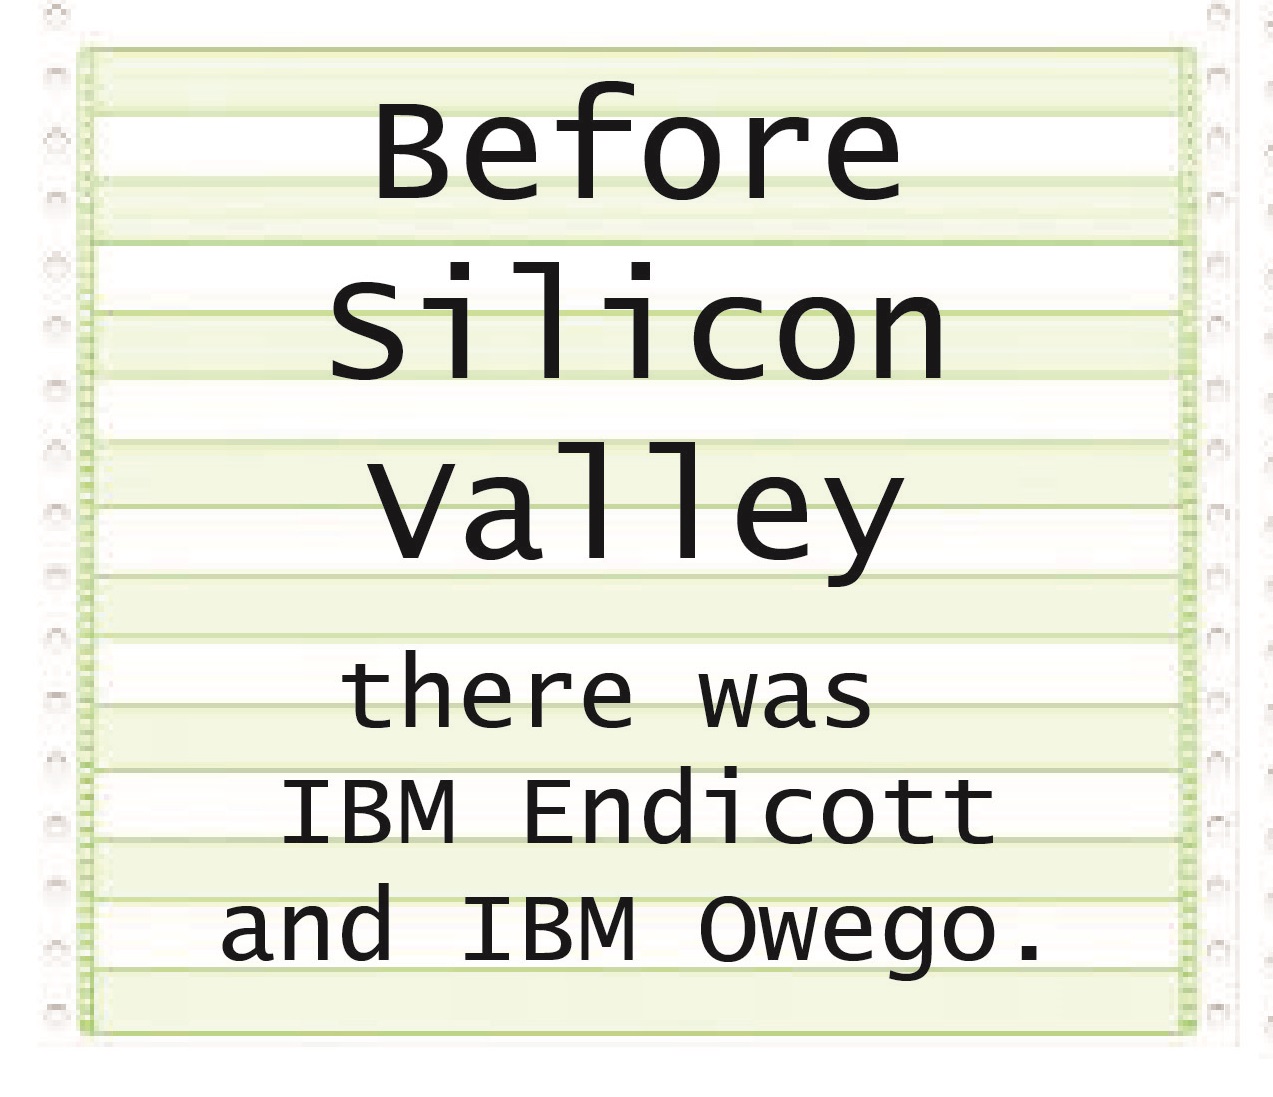 Before Silicon Valley - title block.jpg